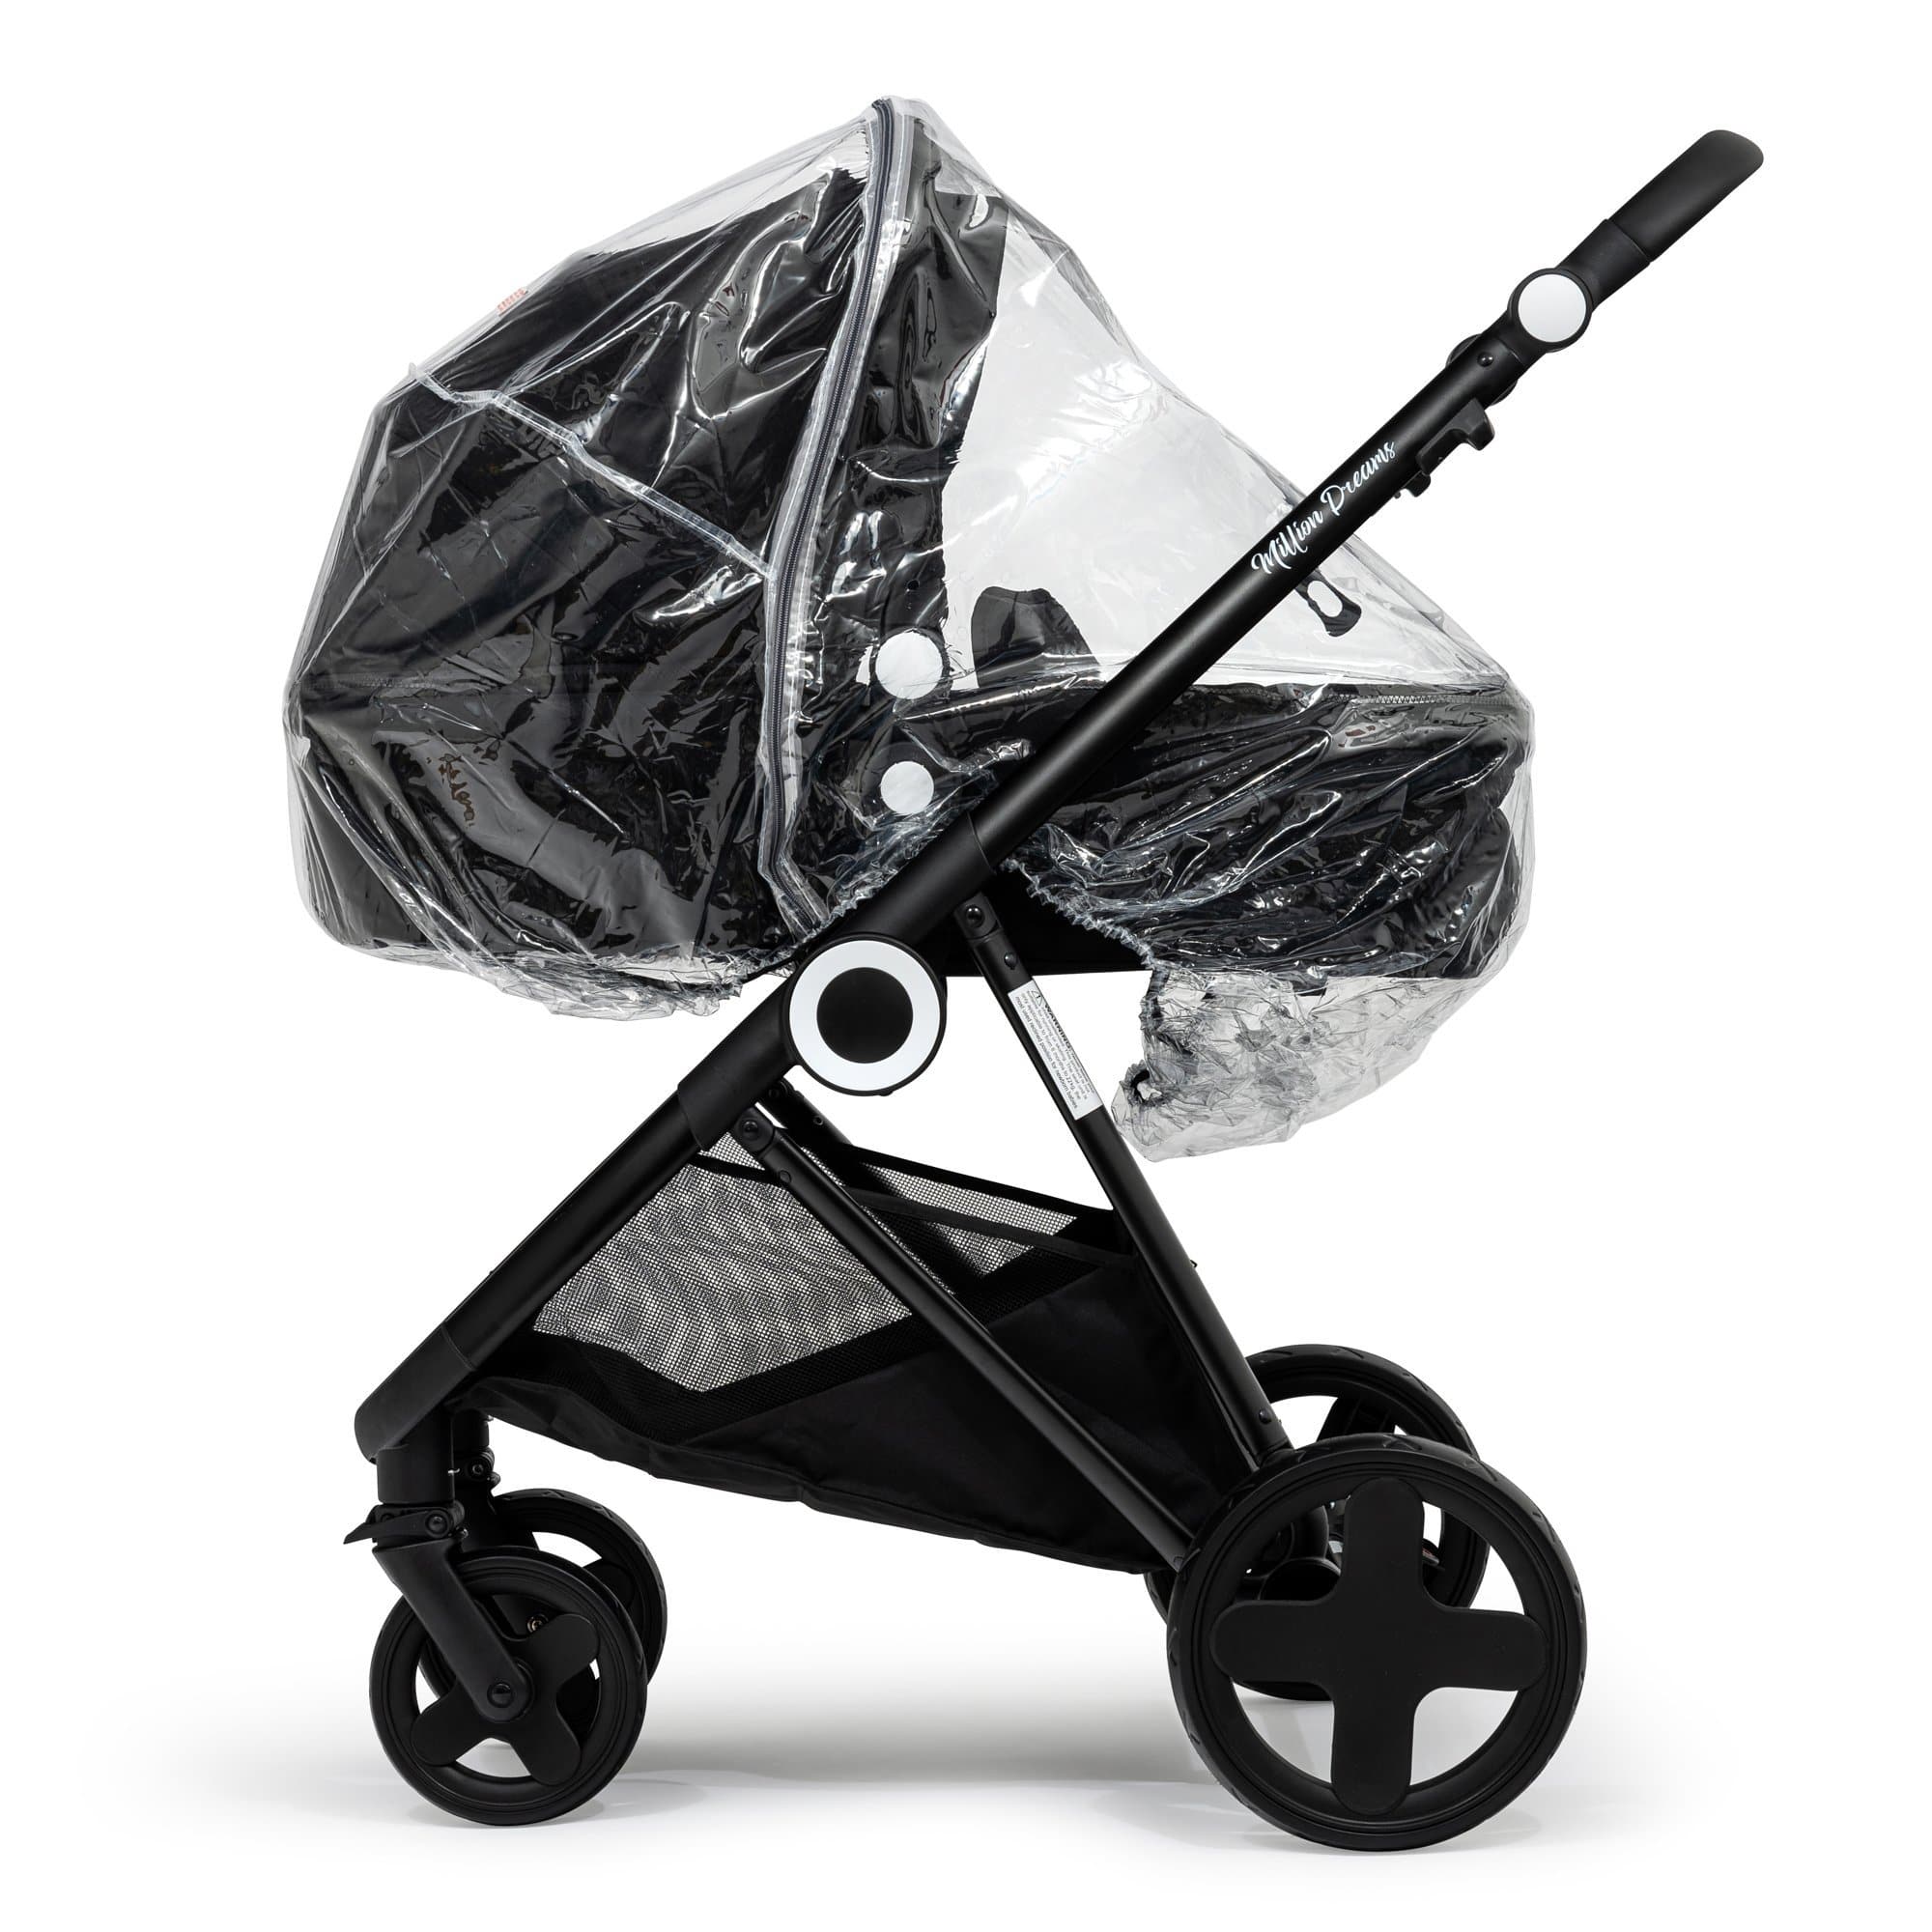 2 in 1 Rain Cover Compatible with My Child - Fits All Models - For Your Little One